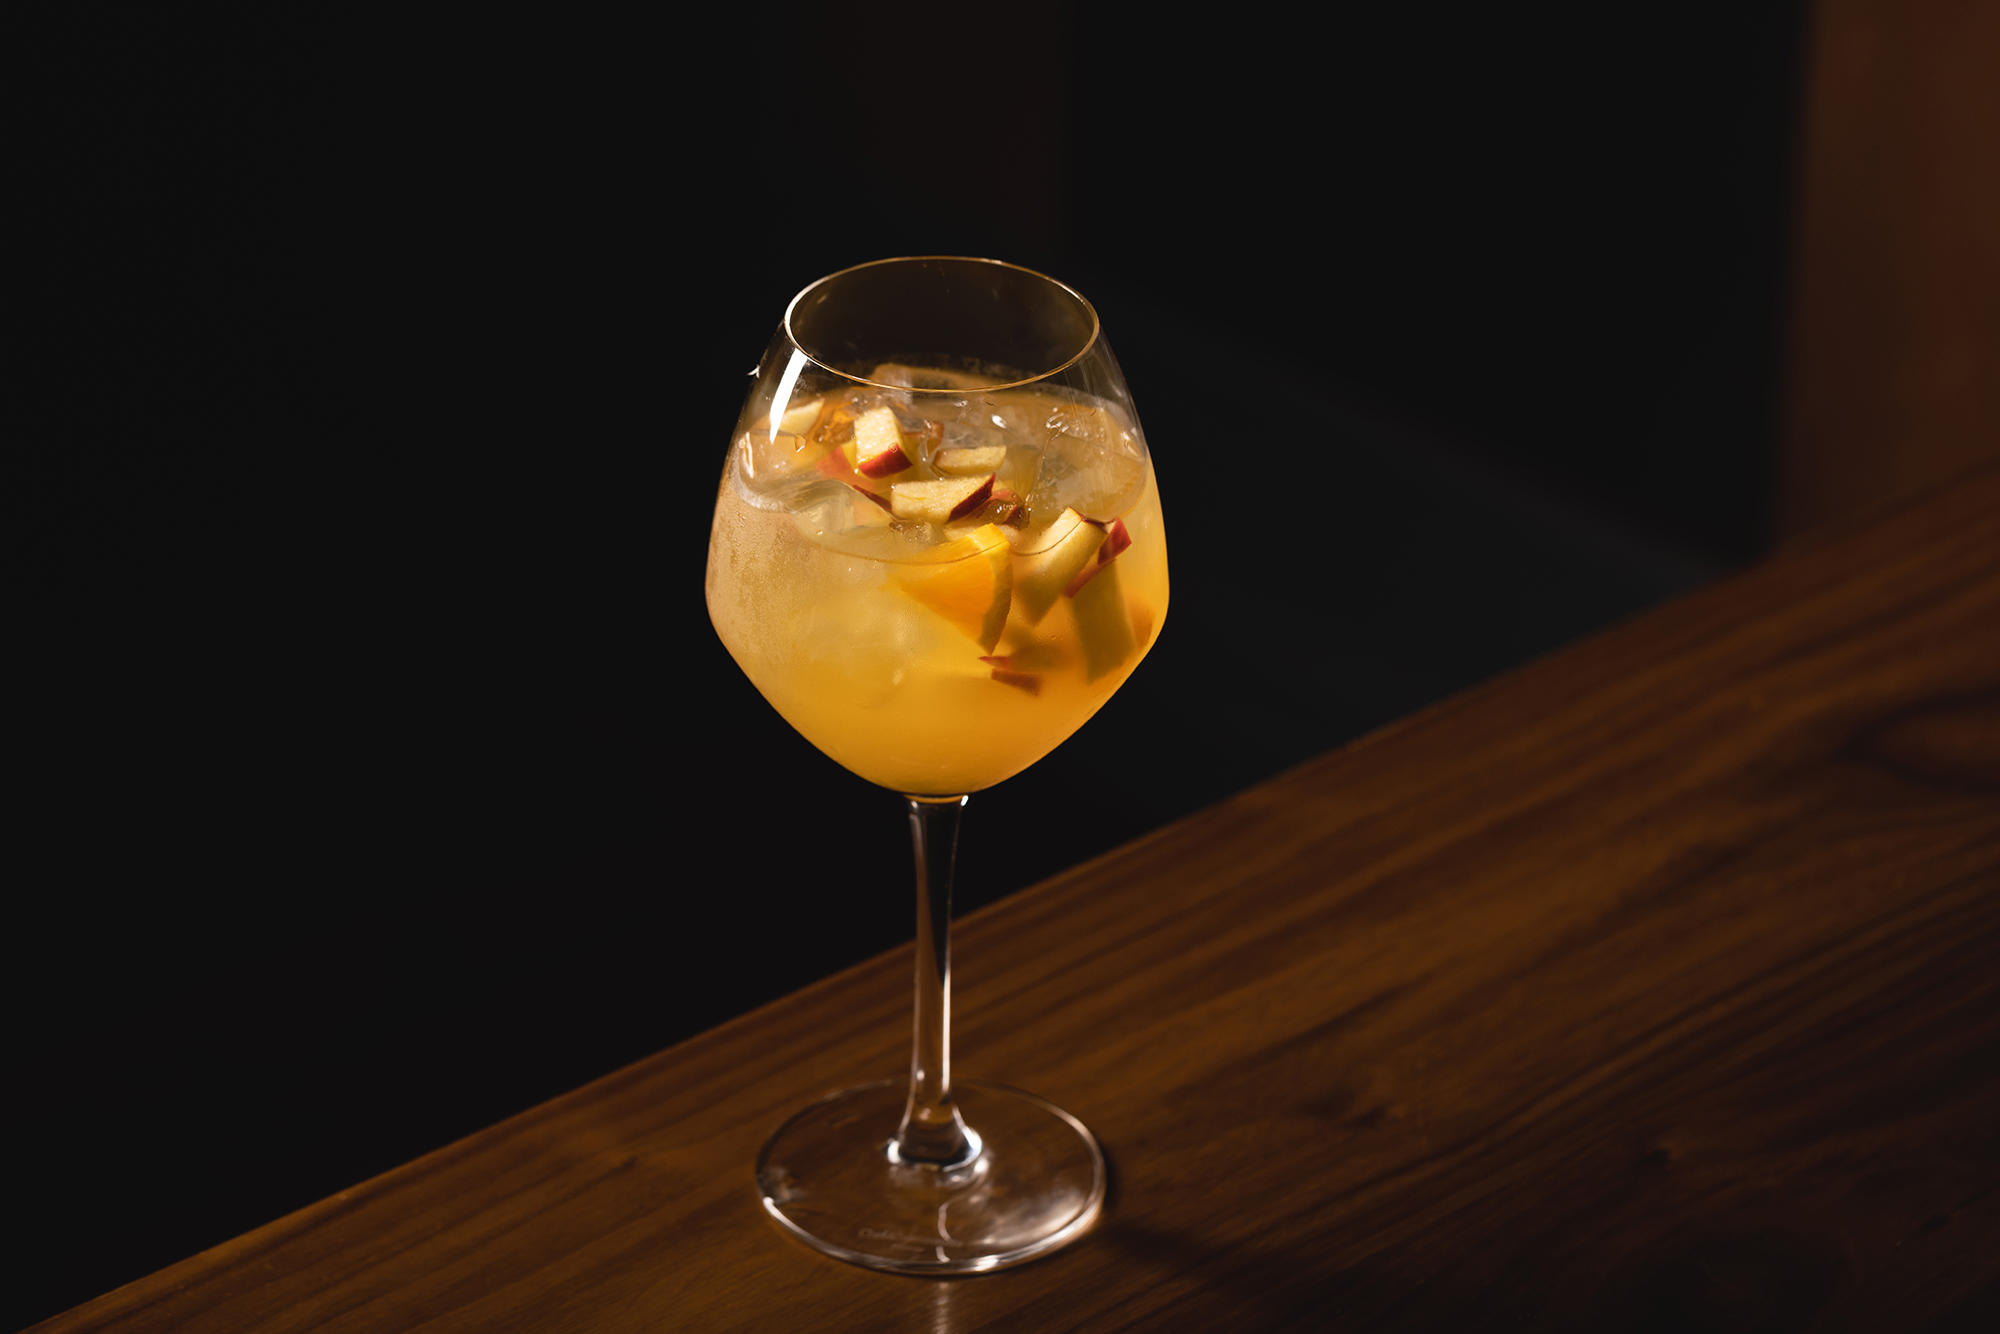 The Independent's handcrafted cocktail of the spring, Sunny Sangria